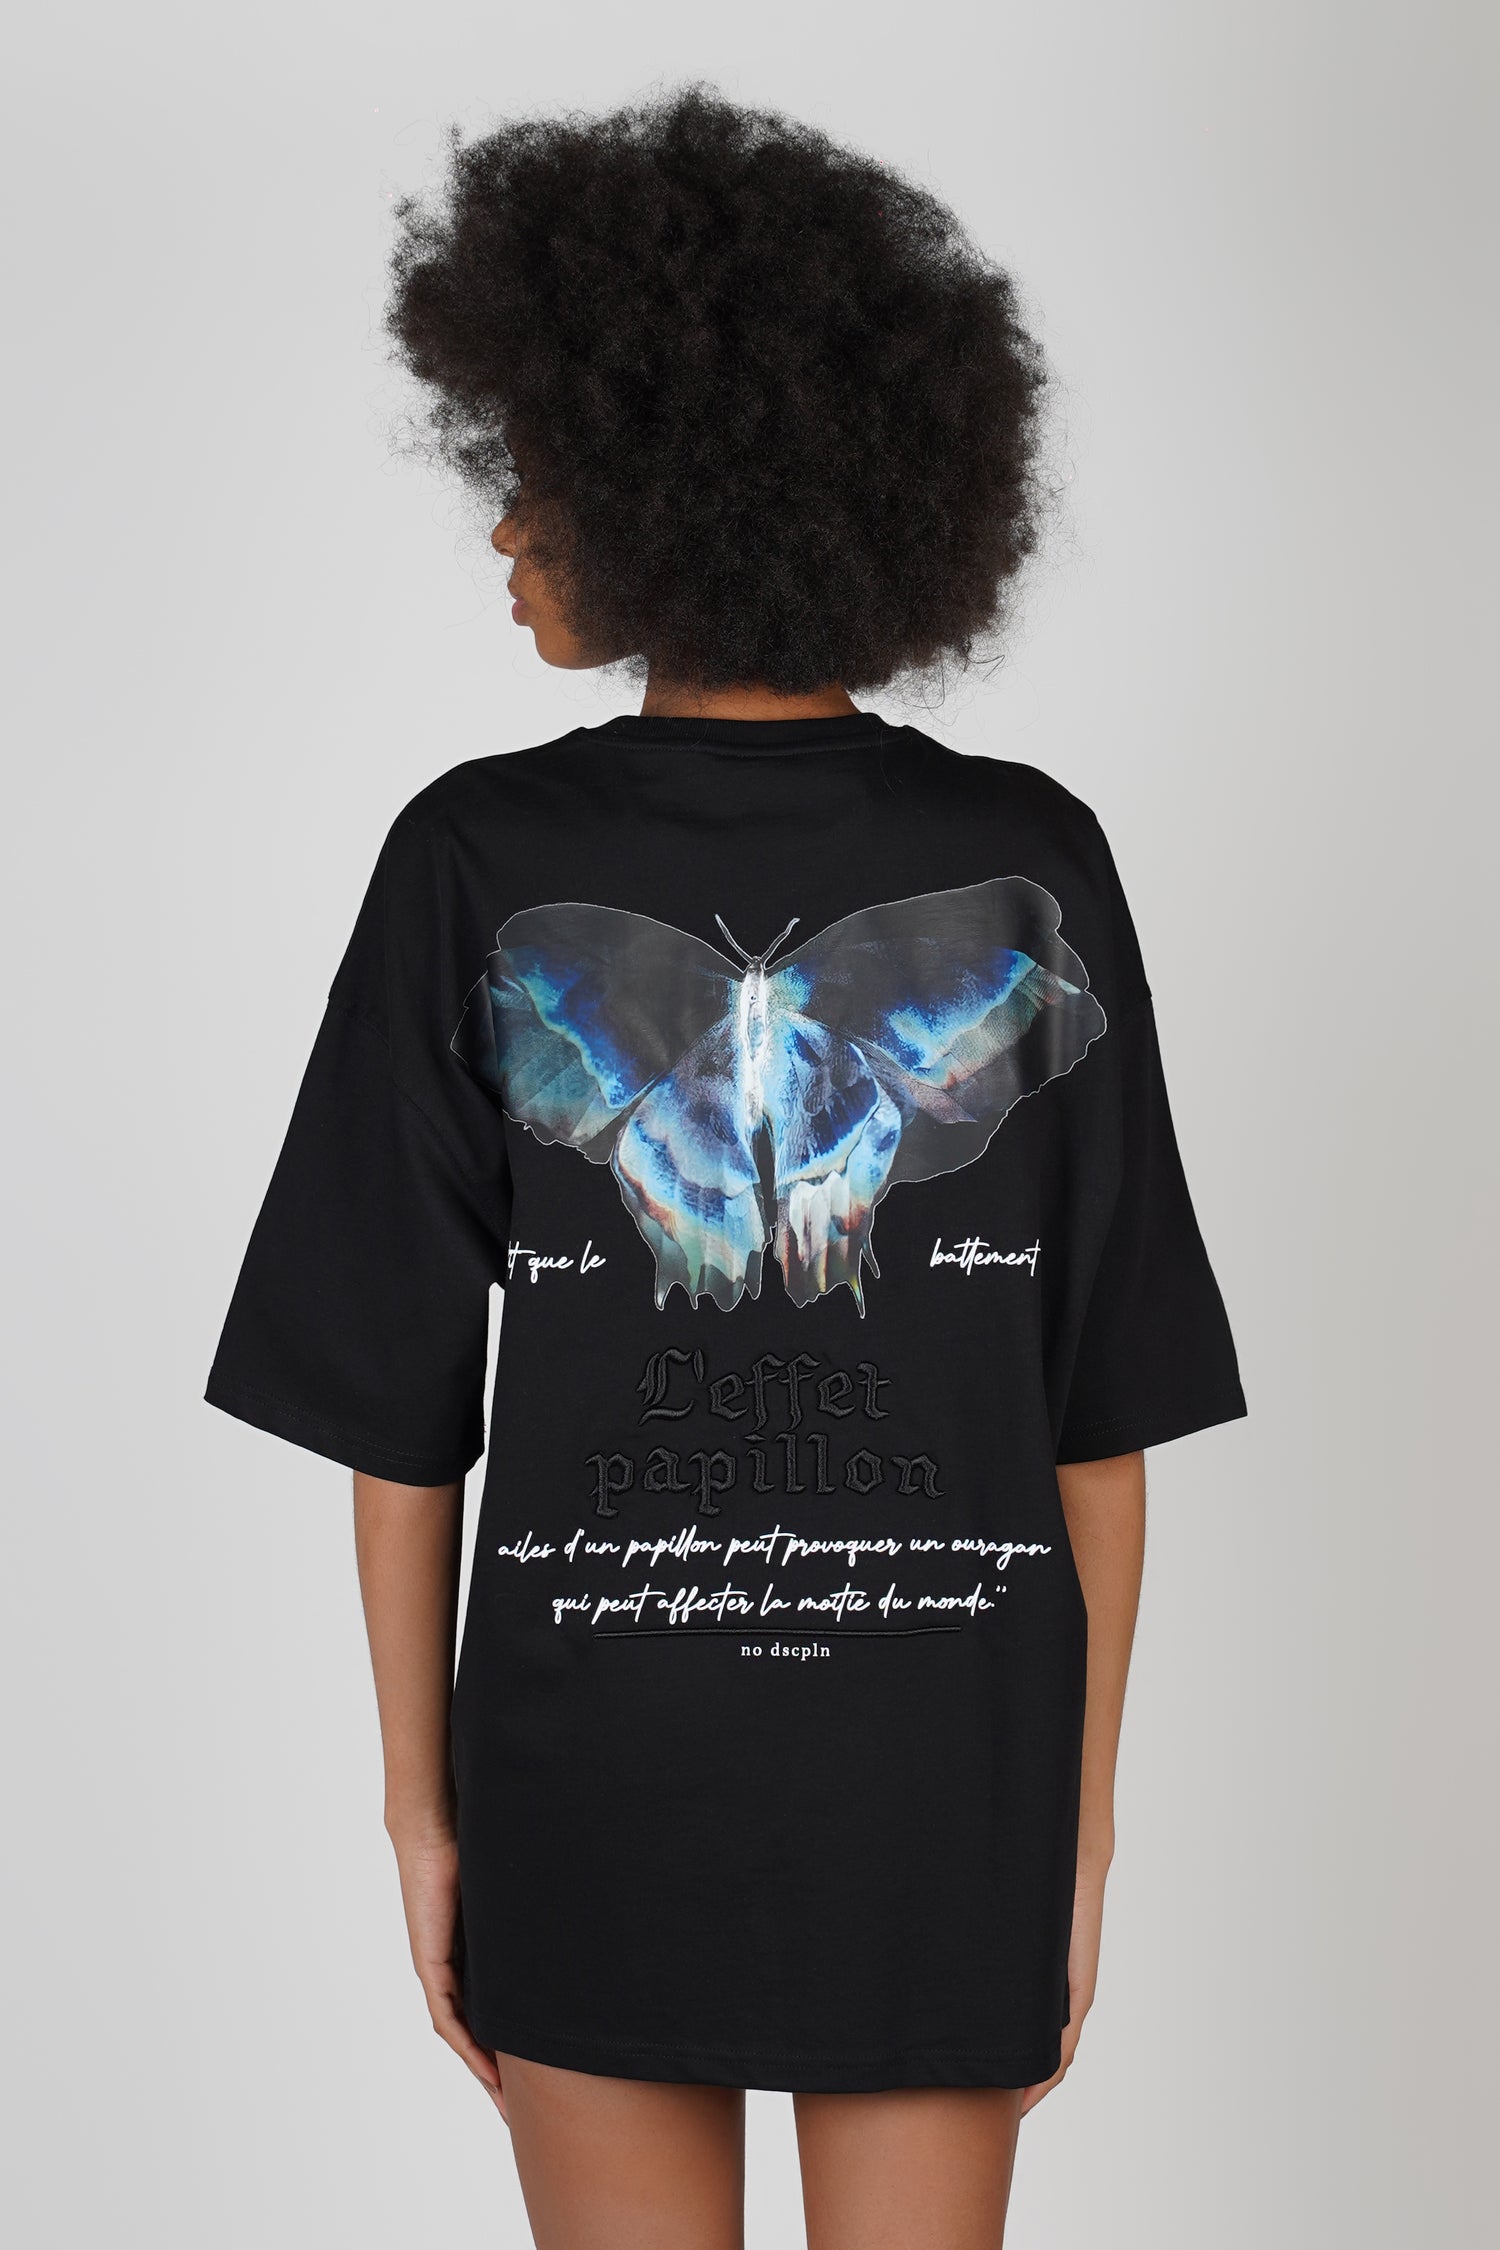 T-SHIRT - THE BUTTERFLY EFFECT - BLACK